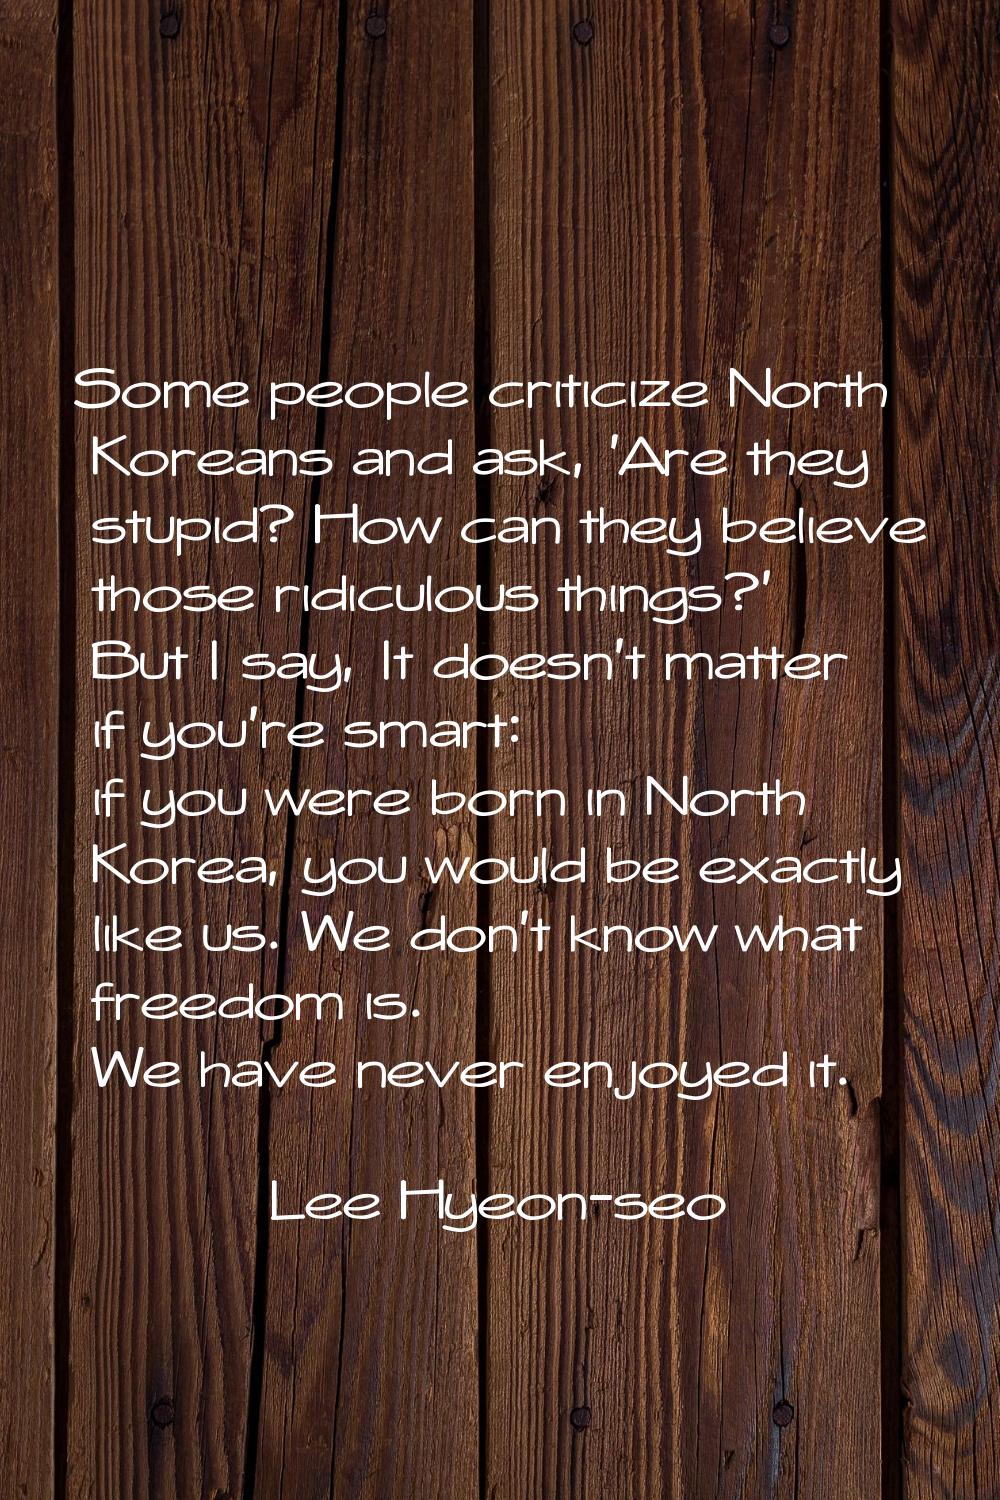 Some people criticize North Koreans and ask, 'Are they stupid? How can they believe those ridiculou